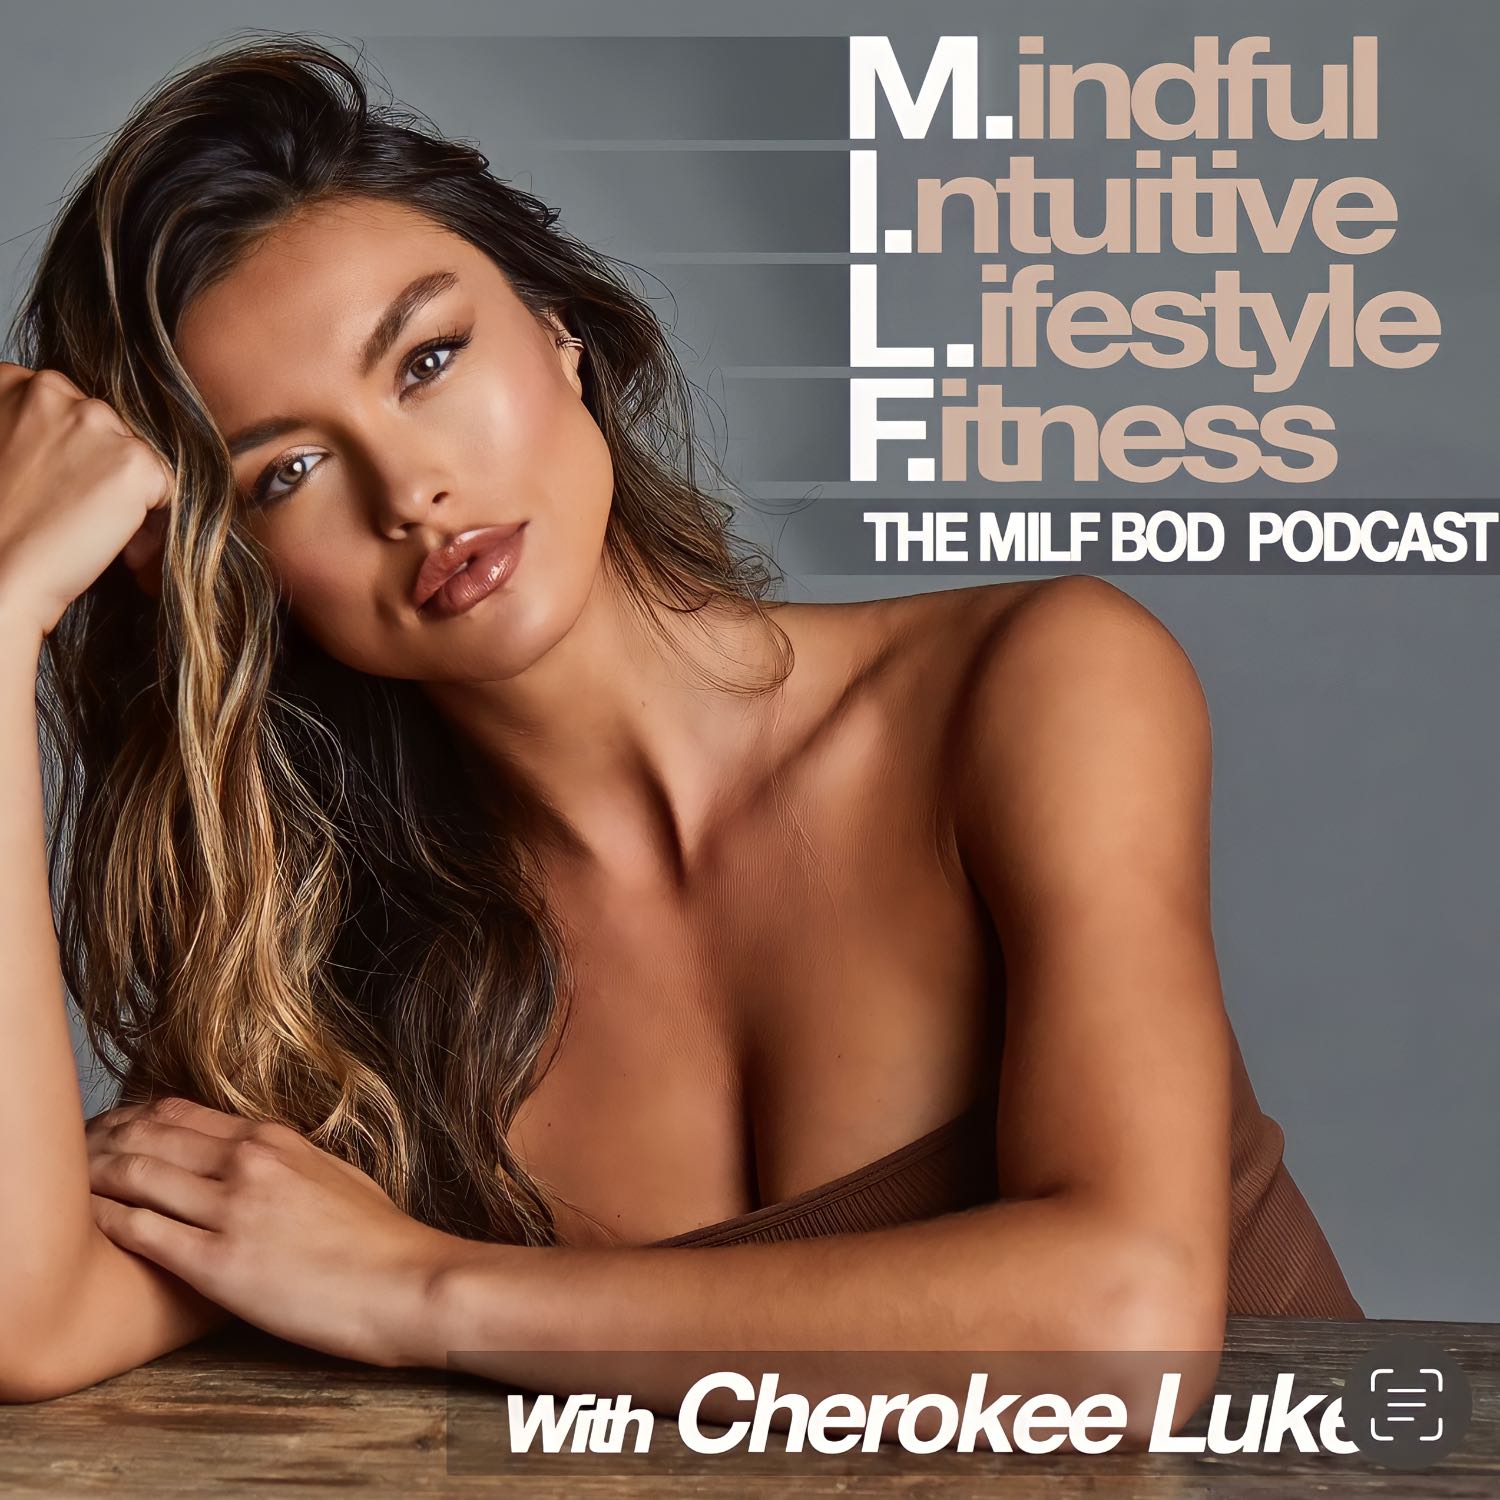 Introducing The M.I.L.F. Bod Podcast with Cherokee Luker